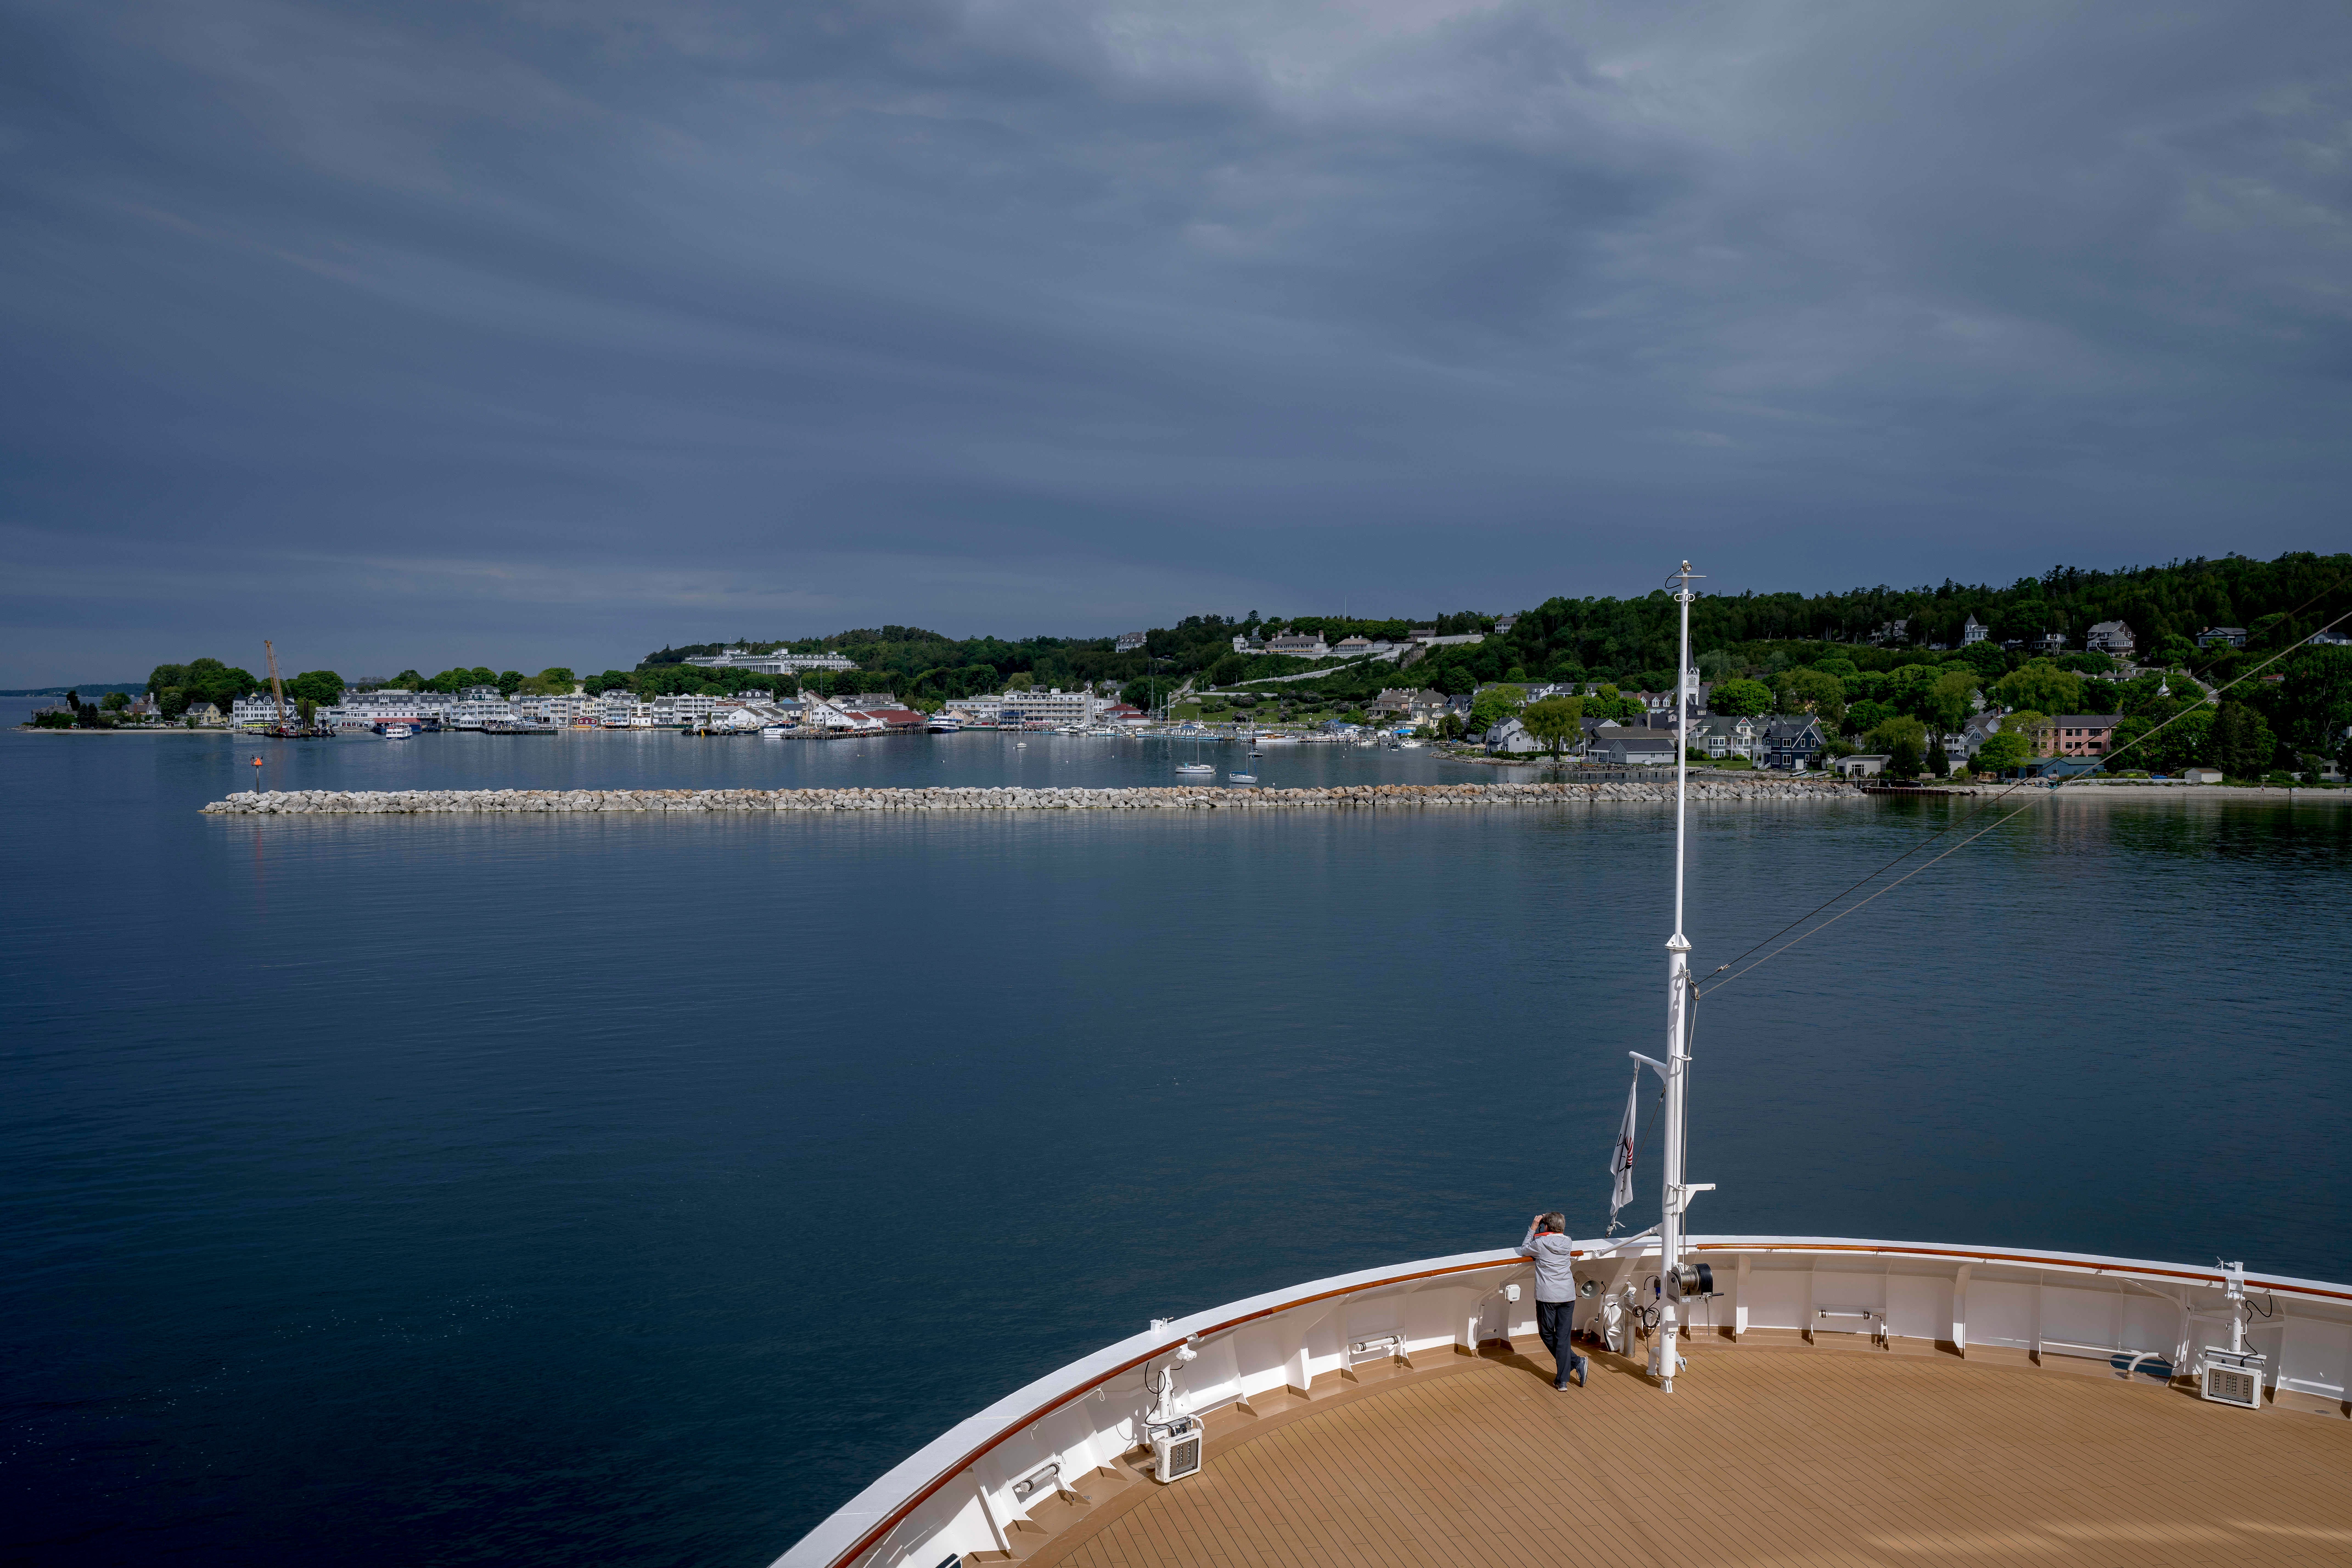 Mackinac Island is pictured while aboard the Viking Octantis on Lake Huron on June 19, 2022. The ship was stationed at Mackinac Island, Michigan. 

I like the simplicity and design of this image from when we reached our first destination: Mackinac Island. The color palette feels really nice here. Because of the size and relatively small amount of people on the boat, it often felt empty like this, where you felt like you had it to yourself.